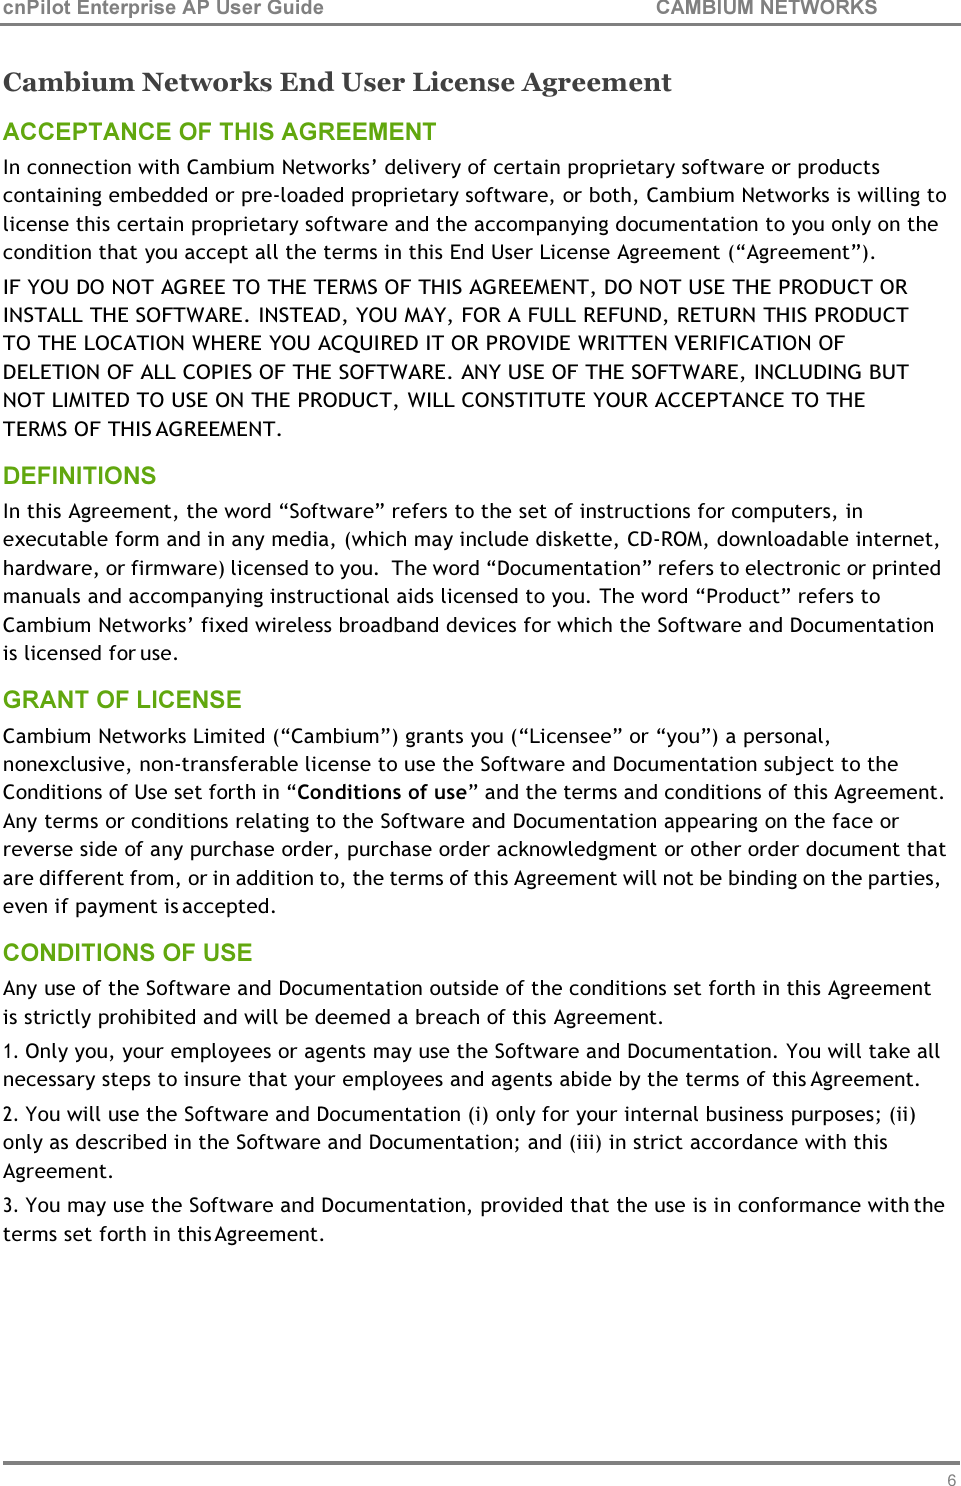 64 cnPilot Enterprise AP User Guide CAMBIUM NETWORKS    Cambium Networks End User License Agreement ACCEPTANCE OF THIS AGREEMENT In connection with Cambium Networks’ delivery of certain proprietary software or products containing embedded or pre-loaded proprietary software, or both, Cambium Networks is willing to license this certain proprietary software and the accompanying documentation to you only on the condition that you accept all the terms in this End User License Agreement (“Agreement”). IF YOU DO NOT AGREE TO THE TERMS OF THIS AGREEMENT, DO NOT USE THE PRODUCT OR INSTALL THE SOFTWARE. INSTEAD, YOU MAY, FOR A FULL REFUND, RETURN THIS PRODUCT TO THE LOCATION WHERE YOU ACQUIRED IT OR PROVIDE WRITTEN VERIFICATION OF DELETION OF ALL COPIES OF THE SOFTWARE. ANY USE OF THE SOFTWARE, INCLUDING BUT NOT LIMITED TO USE ON THE PRODUCT, WILL CONSTITUTE YOUR ACCEPTANCE TO THE TERMS OF THIS AGREEMENT. DEFINITIONS In this Agreement, the word “Software” refers to the set of instructions for computers, in executable form and in any media, (which may include diskette, CD-ROM, downloadable internet, hardware, or firmware) licensed to you.  The word “Documentation” refers to electronic or printed manuals and accompanying instructional aids licensed to you. The word “Product” refers to Cambium Networks’ fixed wireless broadband devices for which the Software and Documentation is licensed for use. GRANT OF LICENSE Cambium Networks Limited (“Cambium”) grants you (“Licensee” or “you”) a personal, nonexclusive, non-transferable license to use the Software and Documentation subject to the Conditions of Use set forth in “Conditions of use” and the terms and conditions of this Agreement. Any terms or conditions relating to the Software and Documentation appearing on the face or reverse side of any purchase order, purchase order acknowledgment or other order document that are different from, or in addition to, the terms of this Agreement will not be binding on the parties, even if payment is accepted. CONDITIONS OF USE Any use of the Software and Documentation outside of the conditions set forth in this Agreement is strictly prohibited and will be deemed a breach of this Agreement. 1. Only you, your employees or agents may use the Software and Documentation. You will take all necessary steps to insure that your employees and agents abide by the terms of this Agreement. 2. You will use the Software and Documentation (i) only for your internal business purposes; (ii) only as described in the Software and Documentation; and (iii) in strict accordance with this Agreement. 3. You may use the Software and Documentation, provided that the use is in conformance with the terms set forth in this Agreement. 